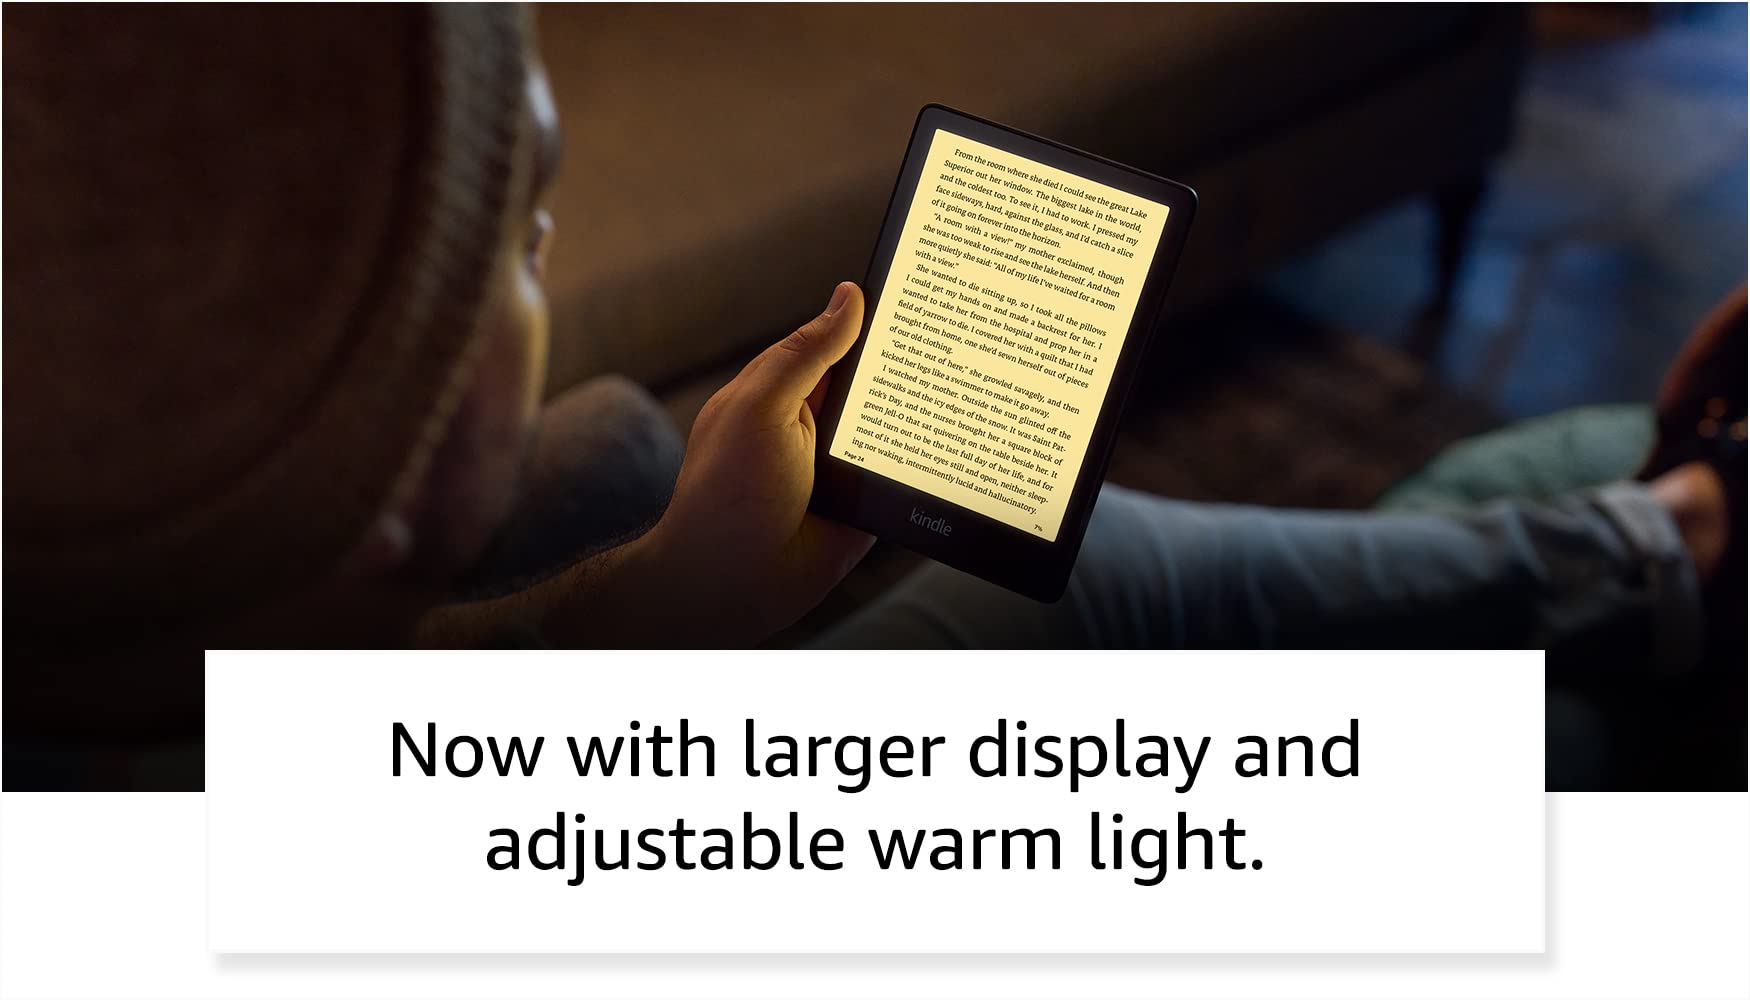 Kindle Paperwhite (16 GB) – Now with a 6.8